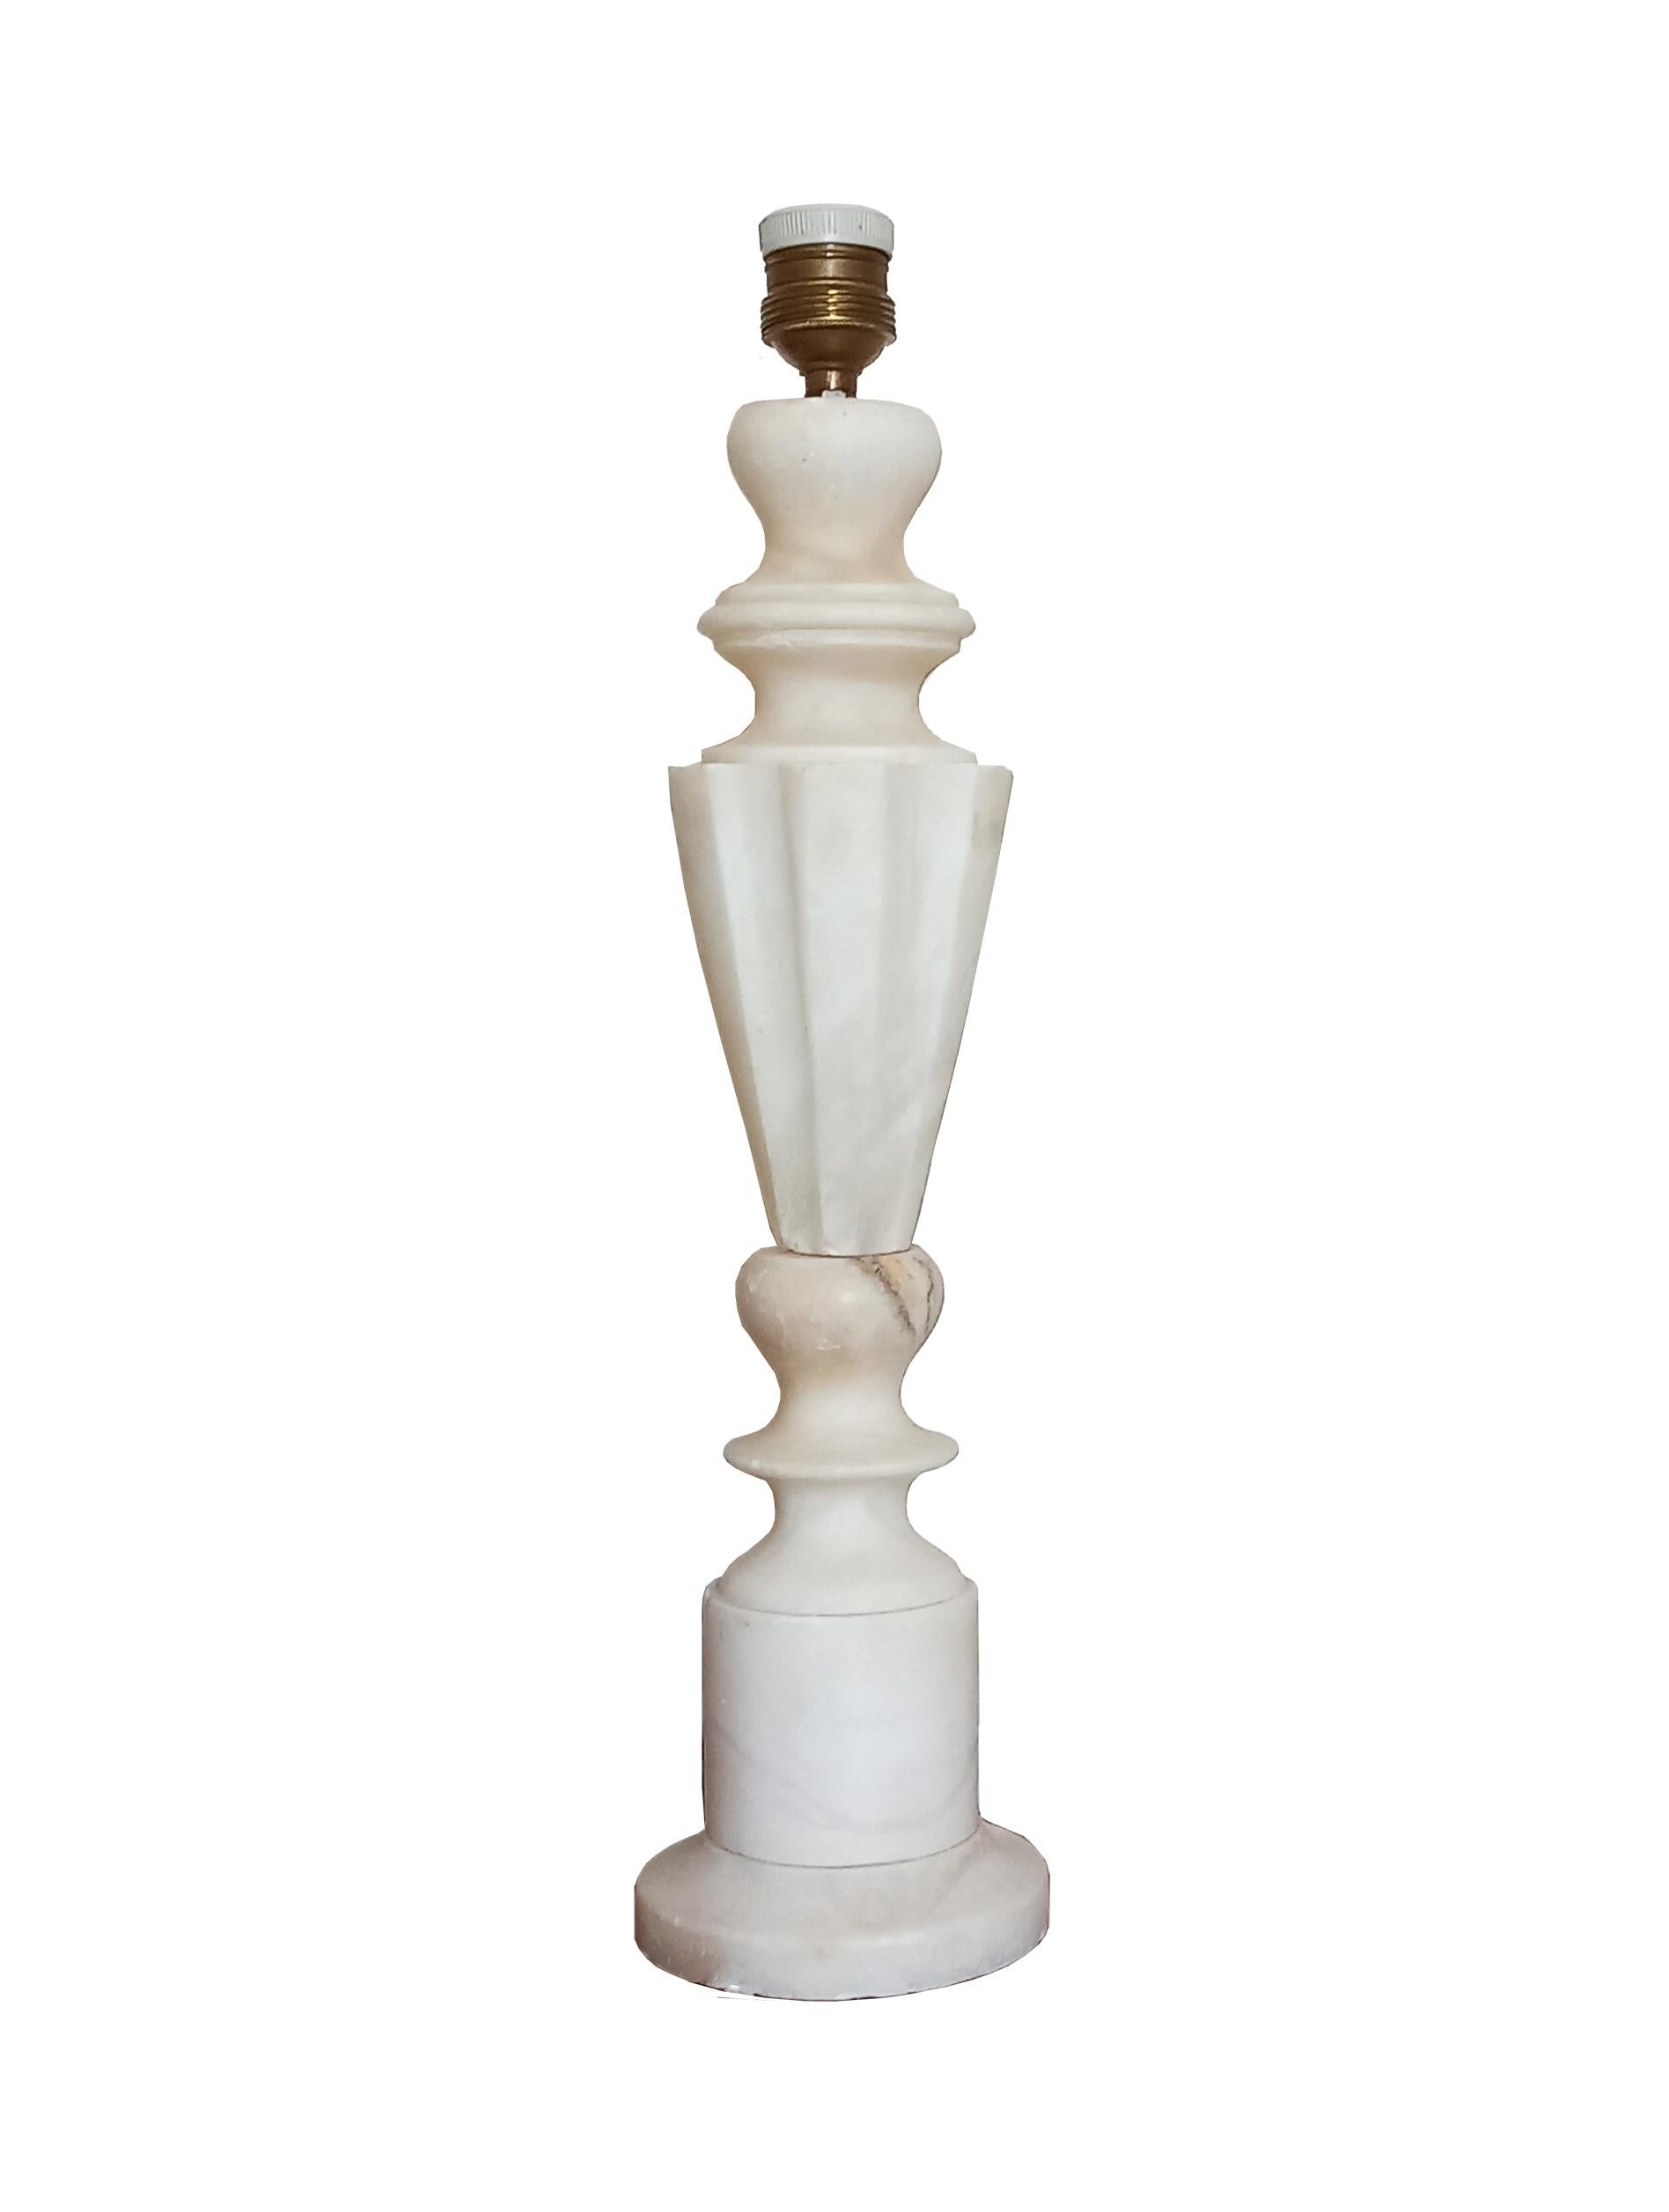 Excelent conditions, like new
Pair or pair of large alabaster or white marble lamps.
They are two lamps made of white alabaster or marble of Spanish or Italian origin. It has the shape of two large columns in the shape of a lamp
They are ideal lamps